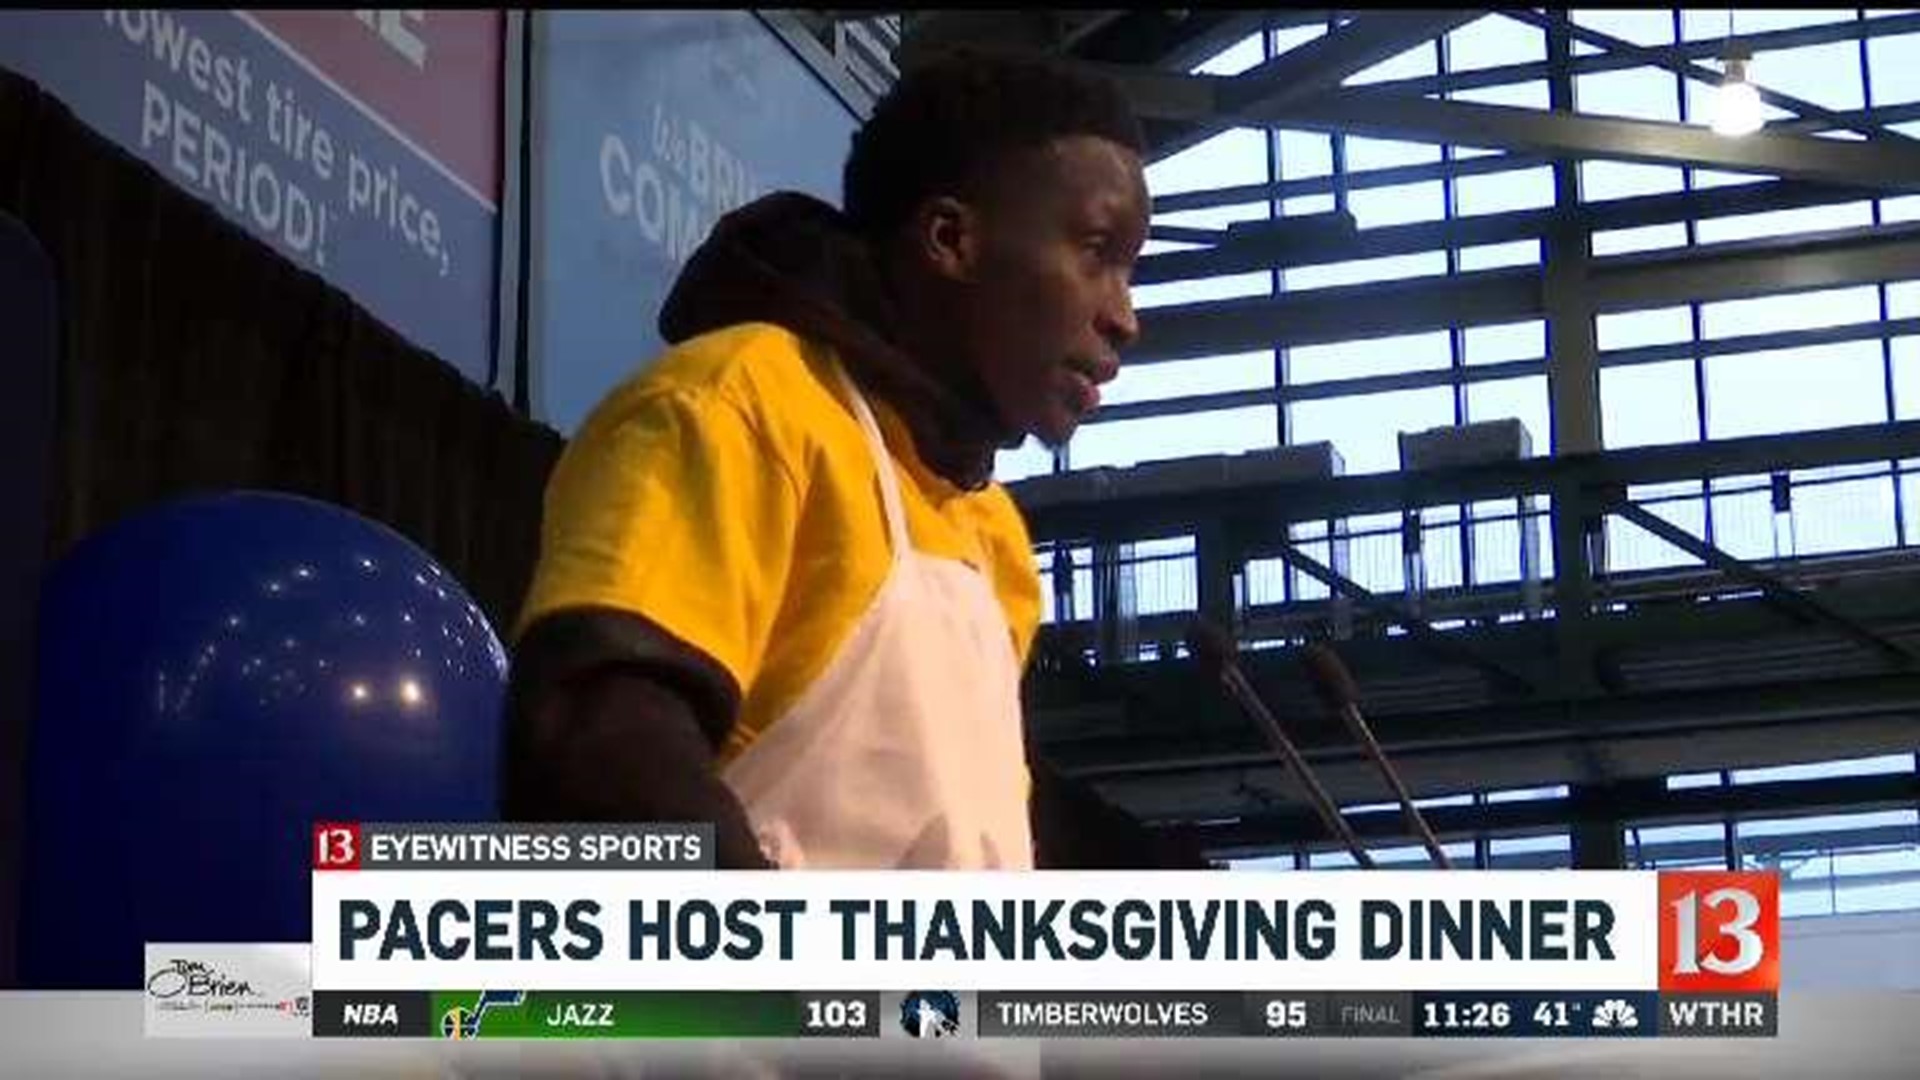 Pacers serve hundreds at Thanksgiving meal